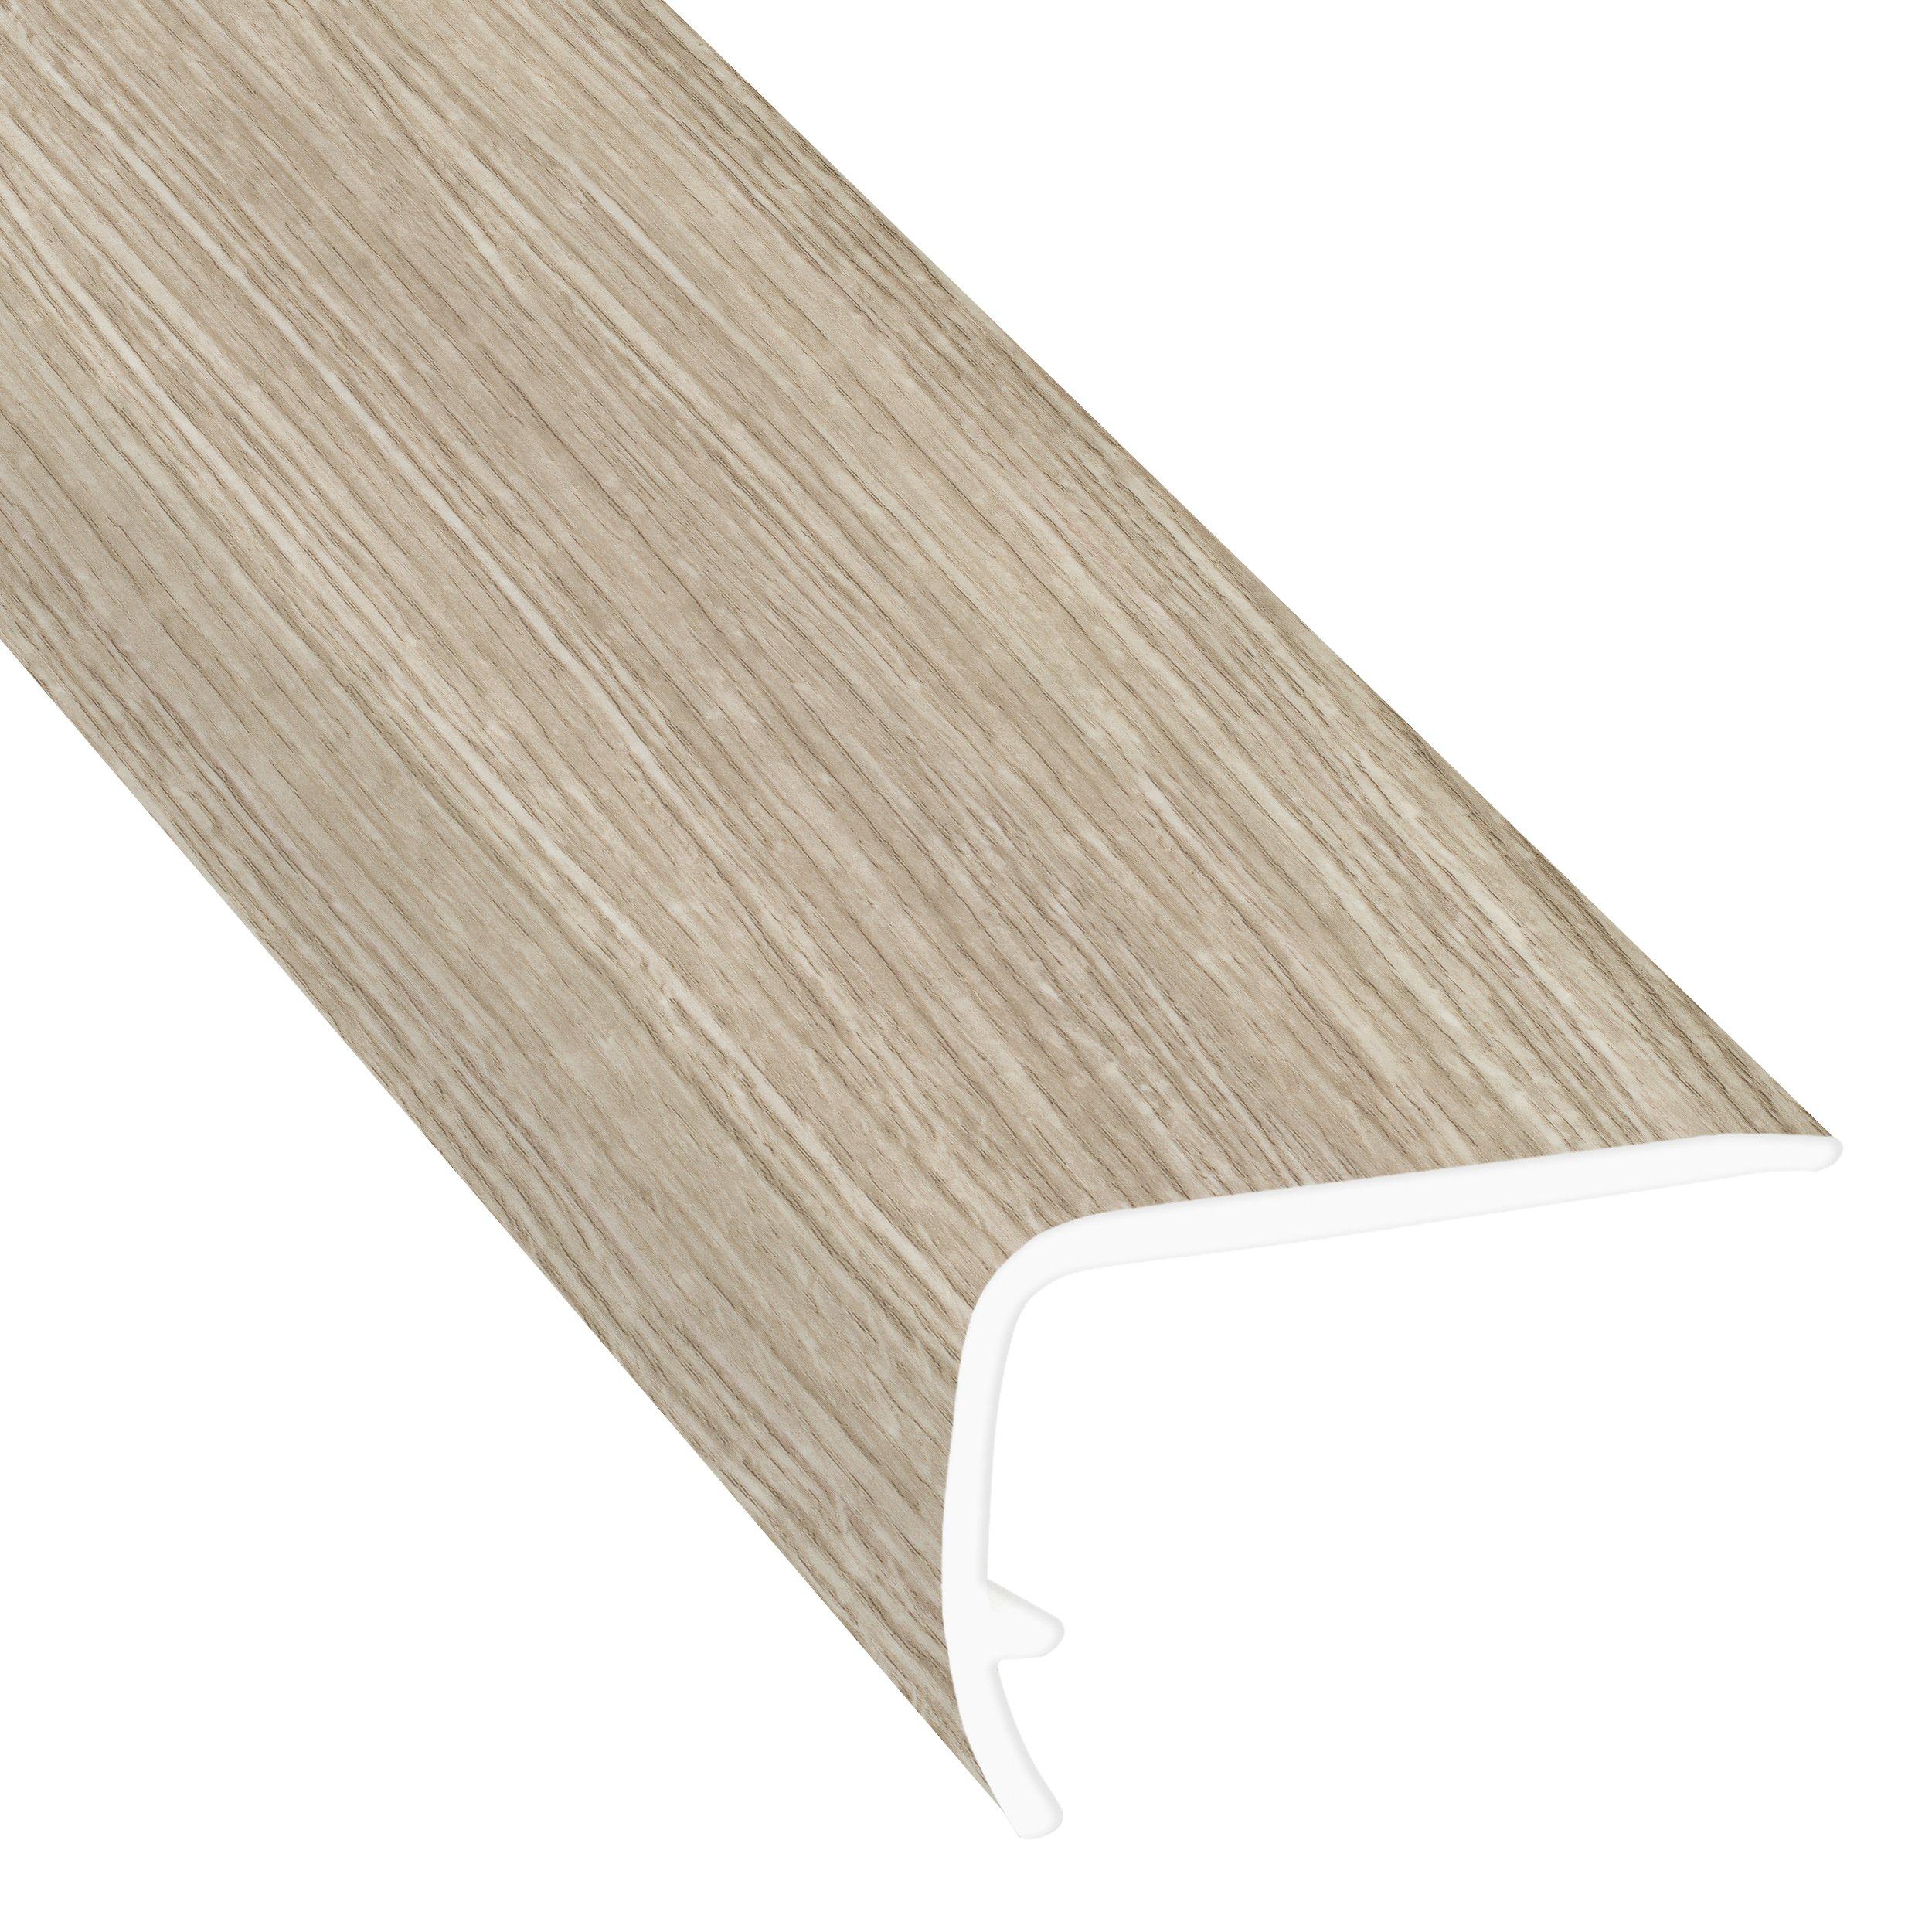 Southport Grove 94in. Vinyl Overlapping Stair Nose